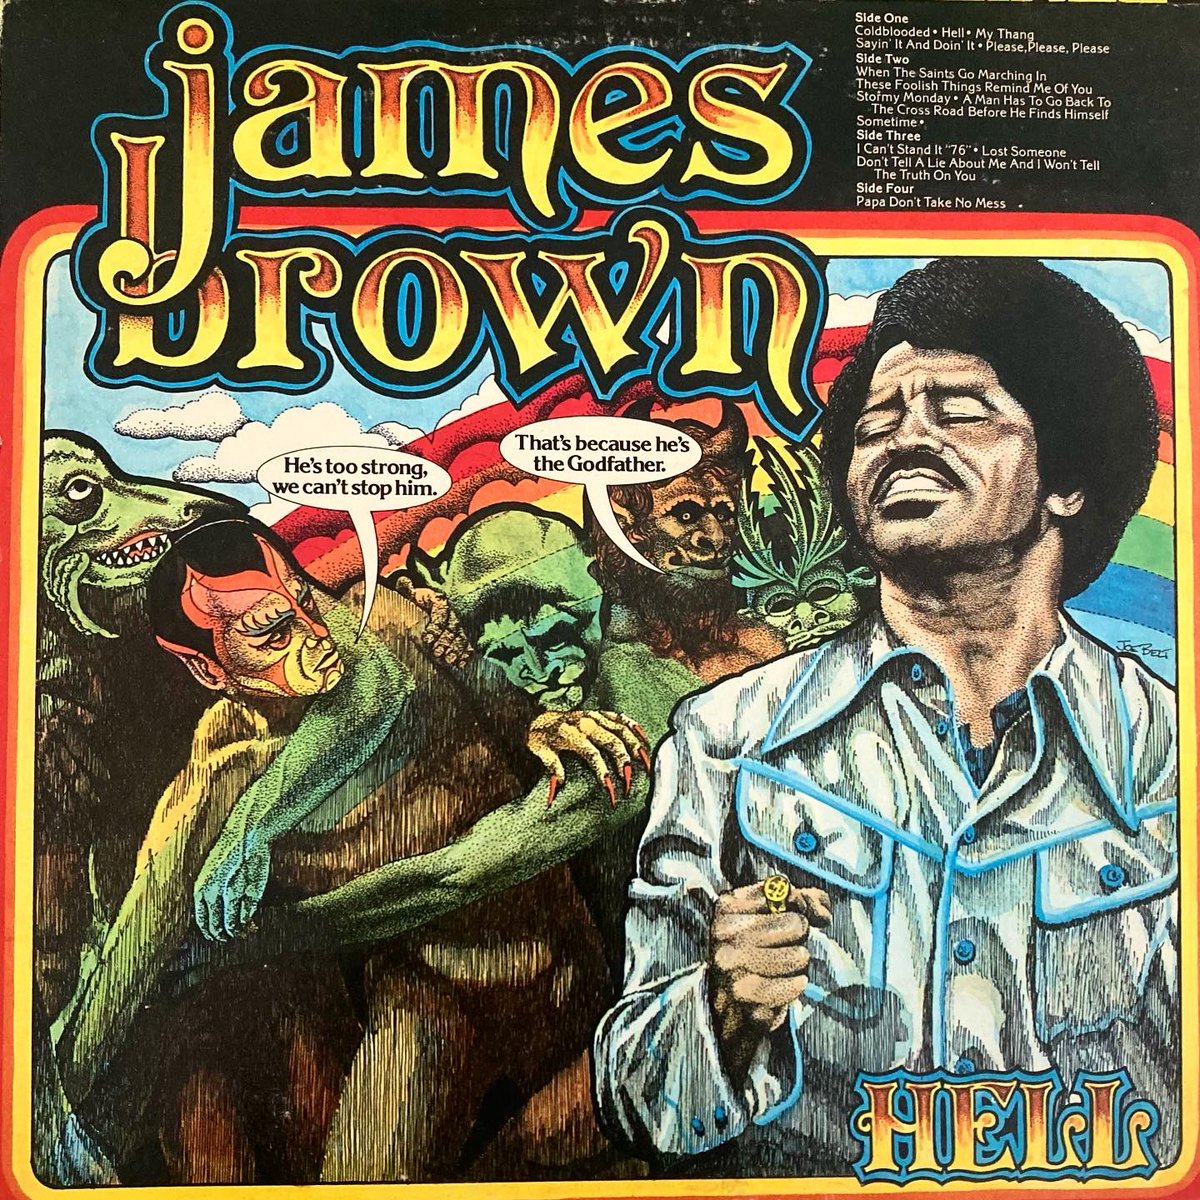 Sunday… with The Minister Of New New Super Heavy Funk… #jamesbrown #hell #funk #soul #gongs #blackcoffee #vinylcommunity #tophaul #thegodfather #always